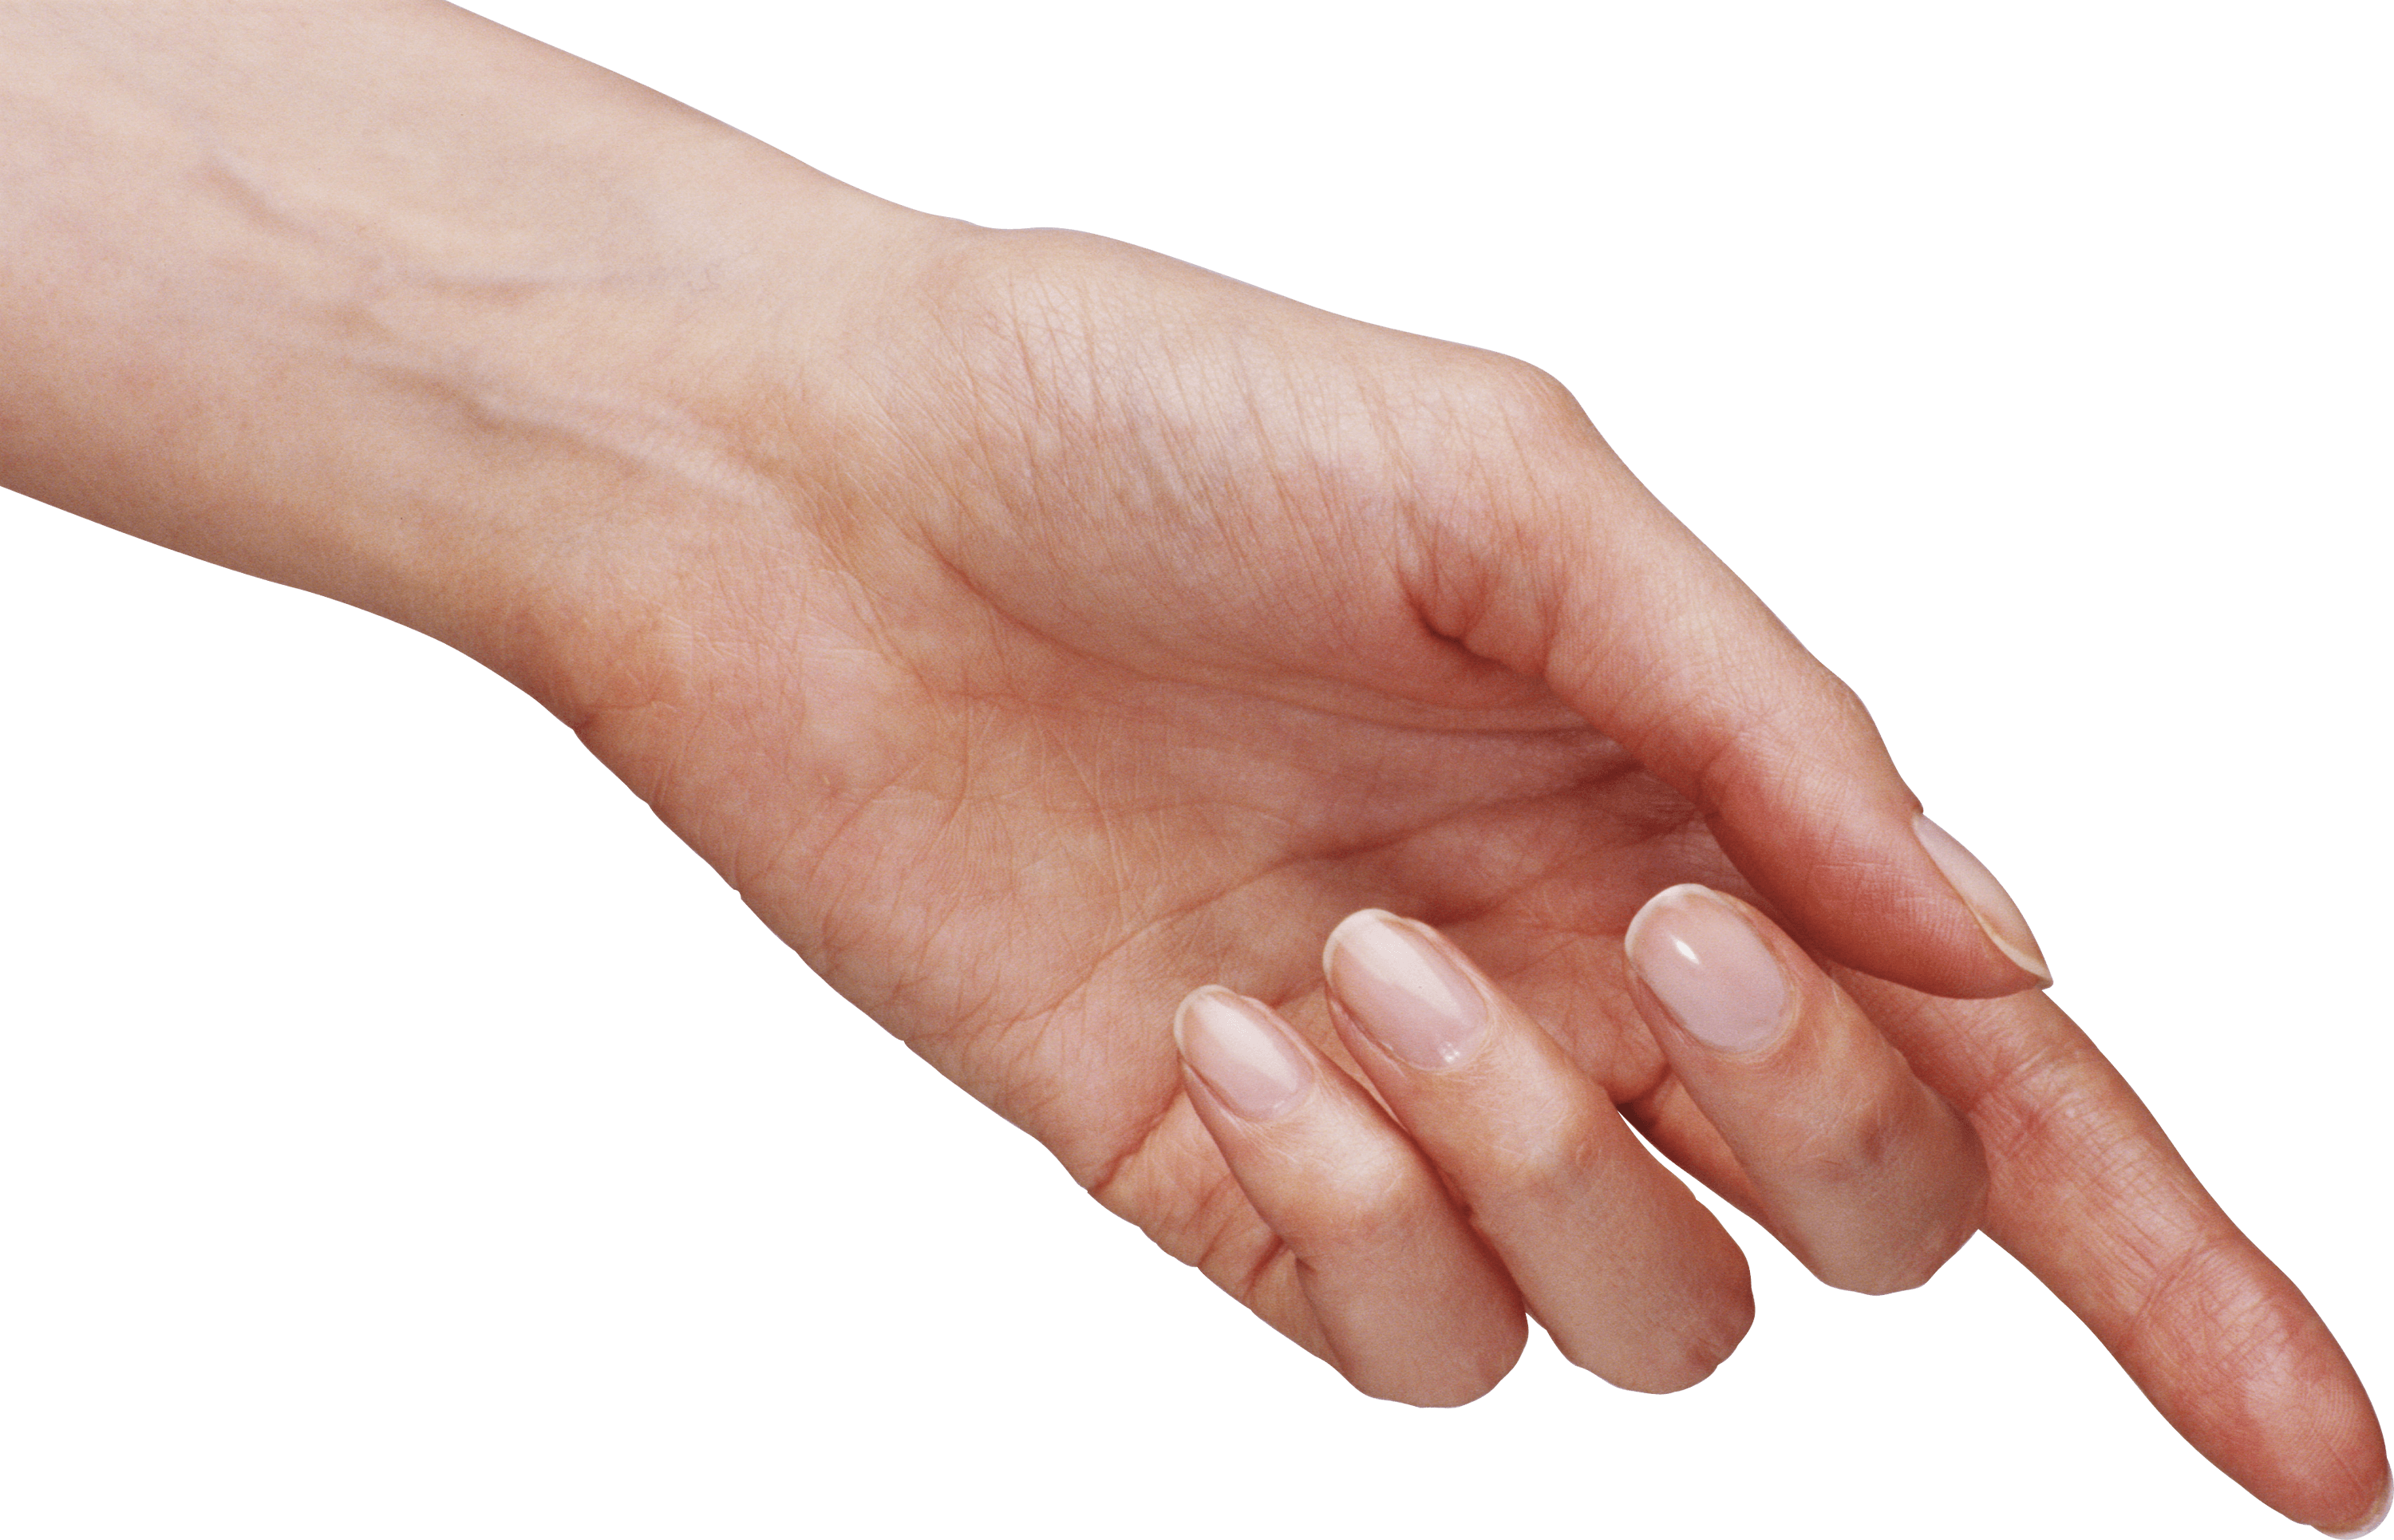 Hands Png Hand Image  PNG Image